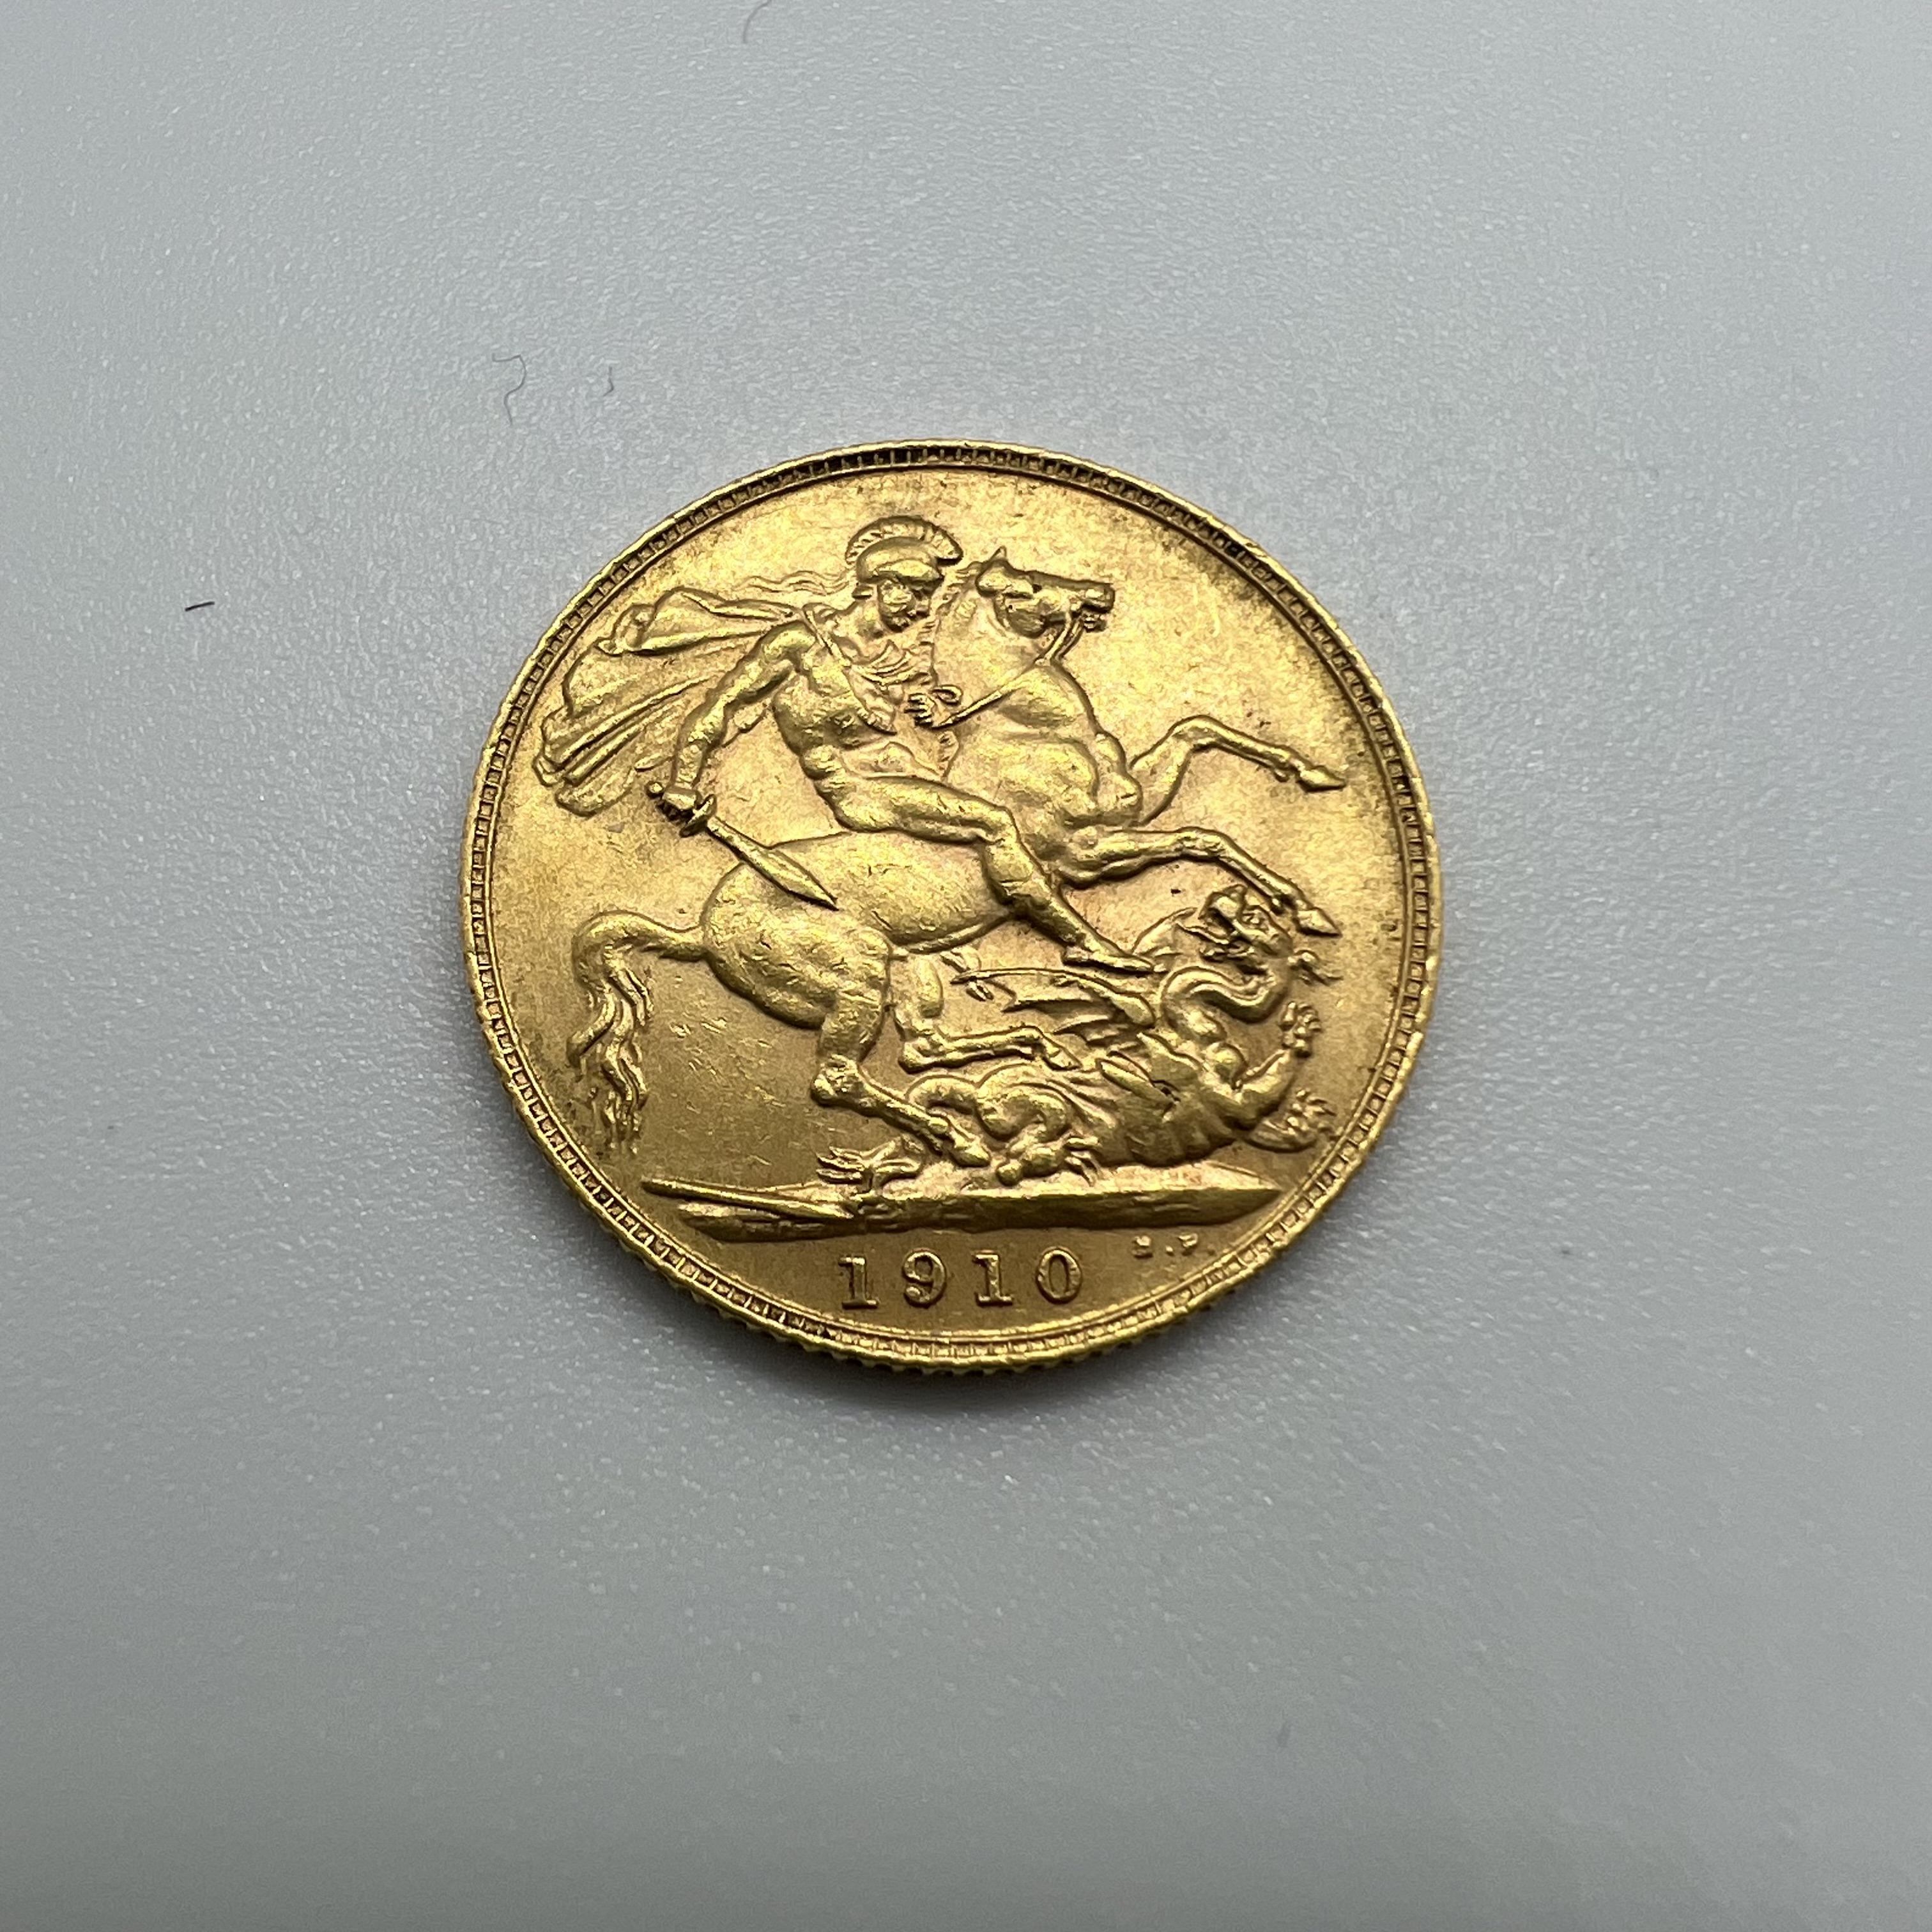 An Edward VII gold sovereign coin, dated 1910.